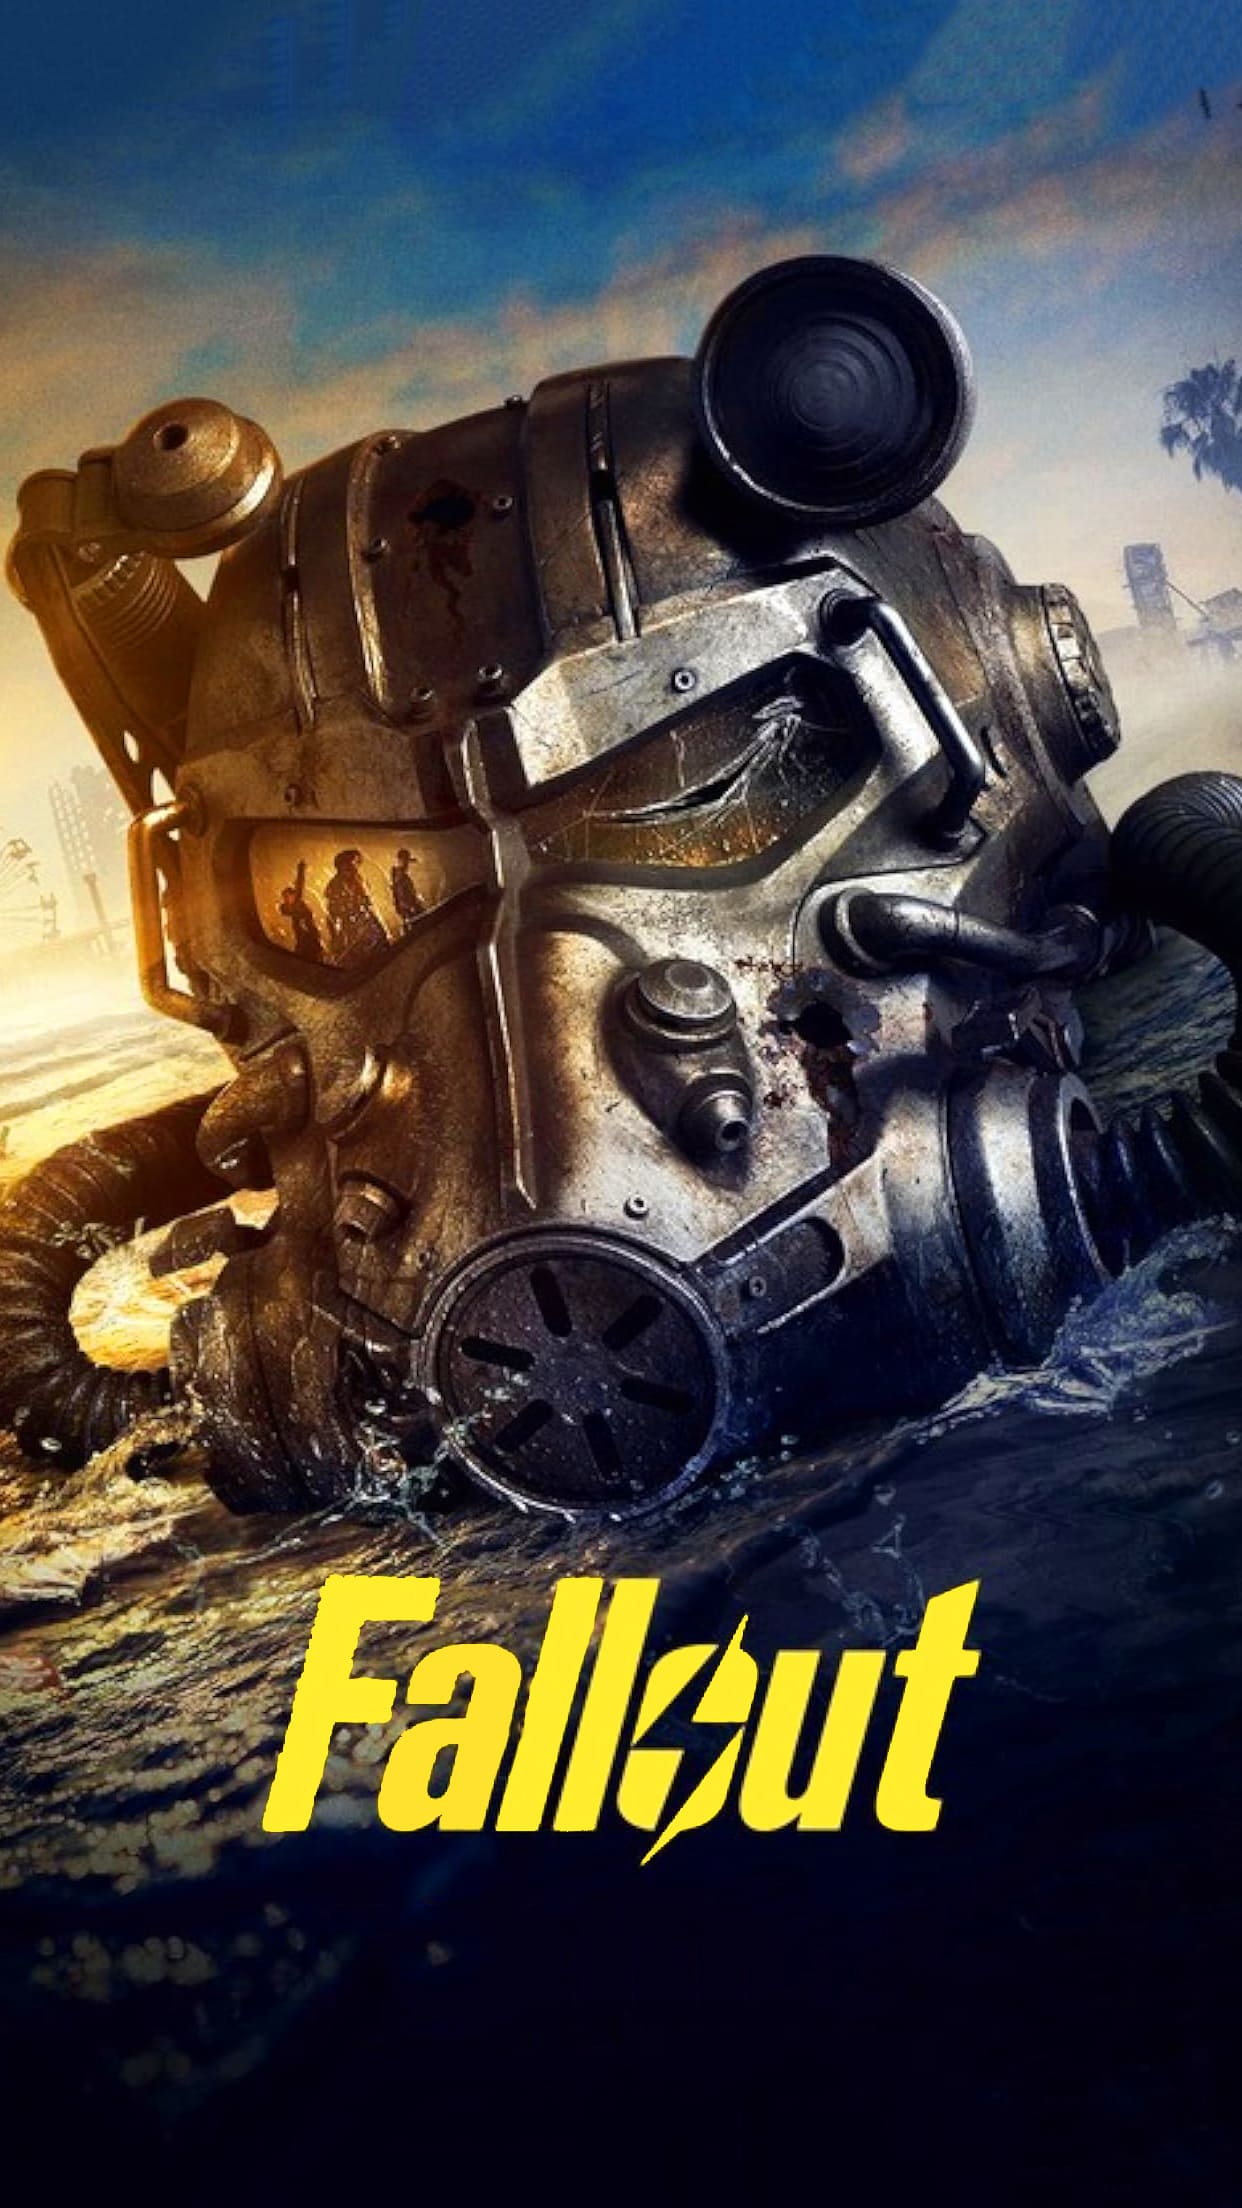 Fallout Series Wallpapers